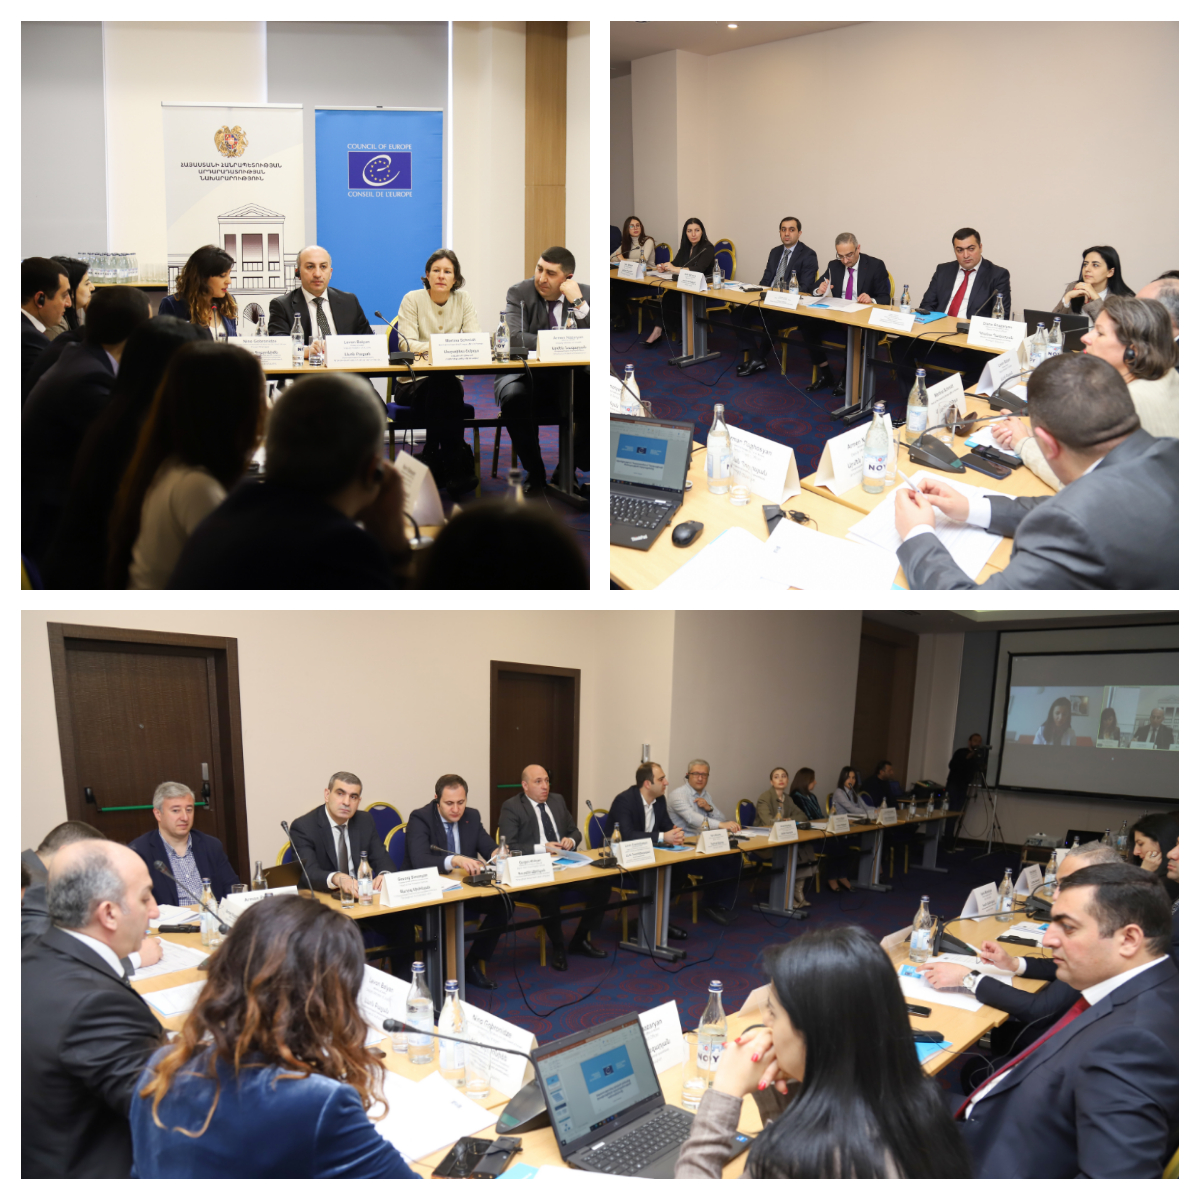 Starting two new continuation Projects ‘’Strengthening the Protection of the Rights of Persons in Detention” and “Strengthening the Probation Service in Armenia”